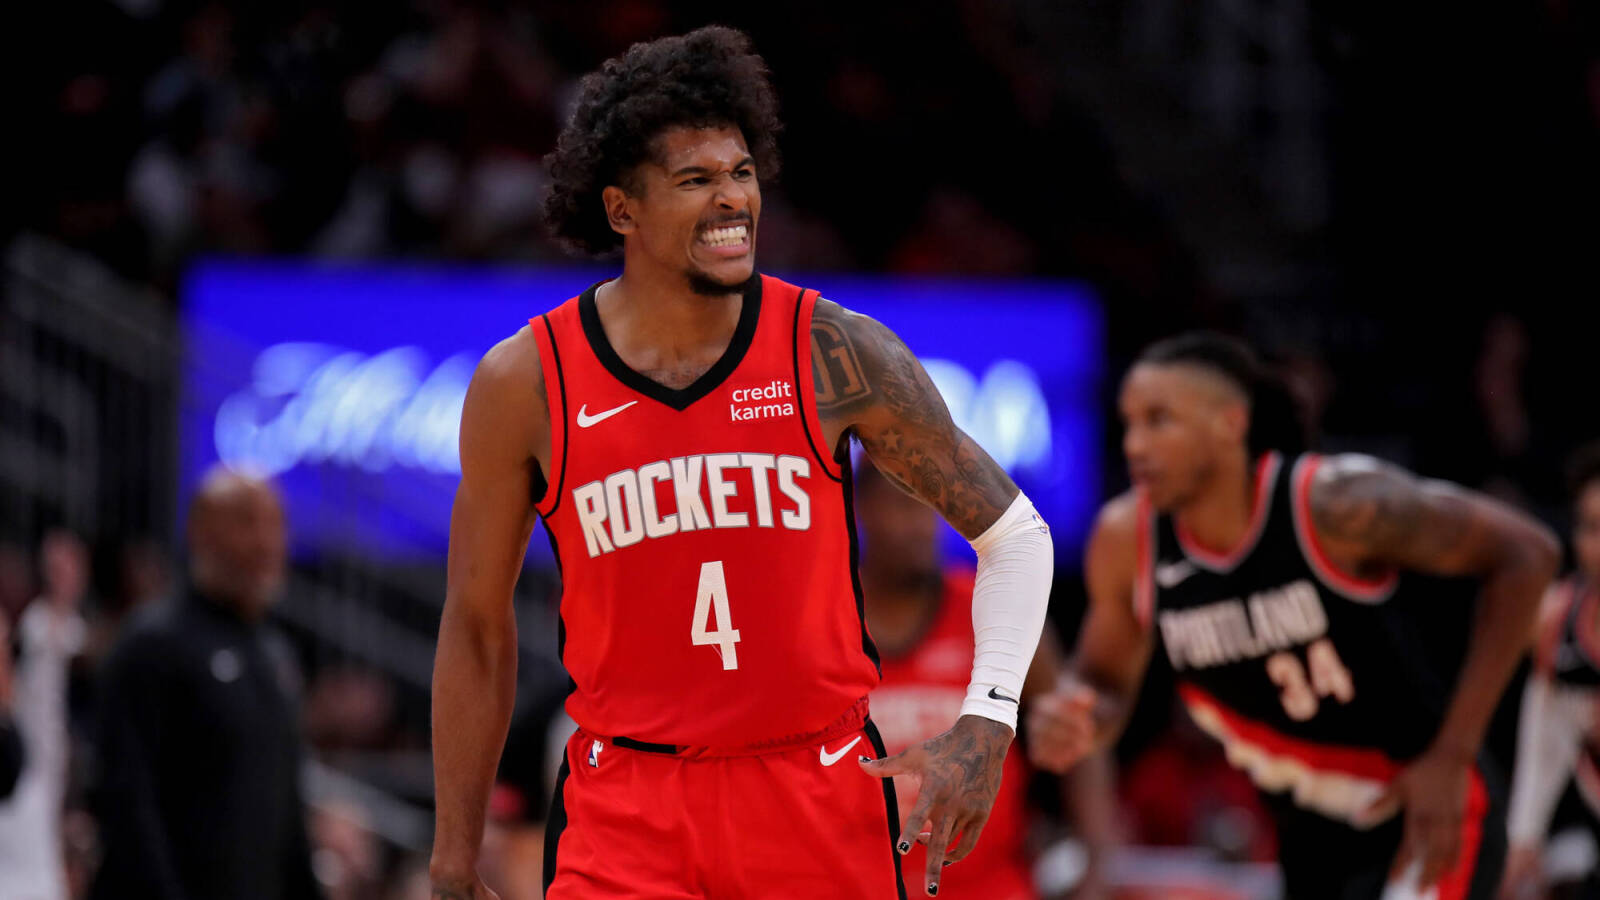 Rockets' arrow pointed up whether or not team makes play-in